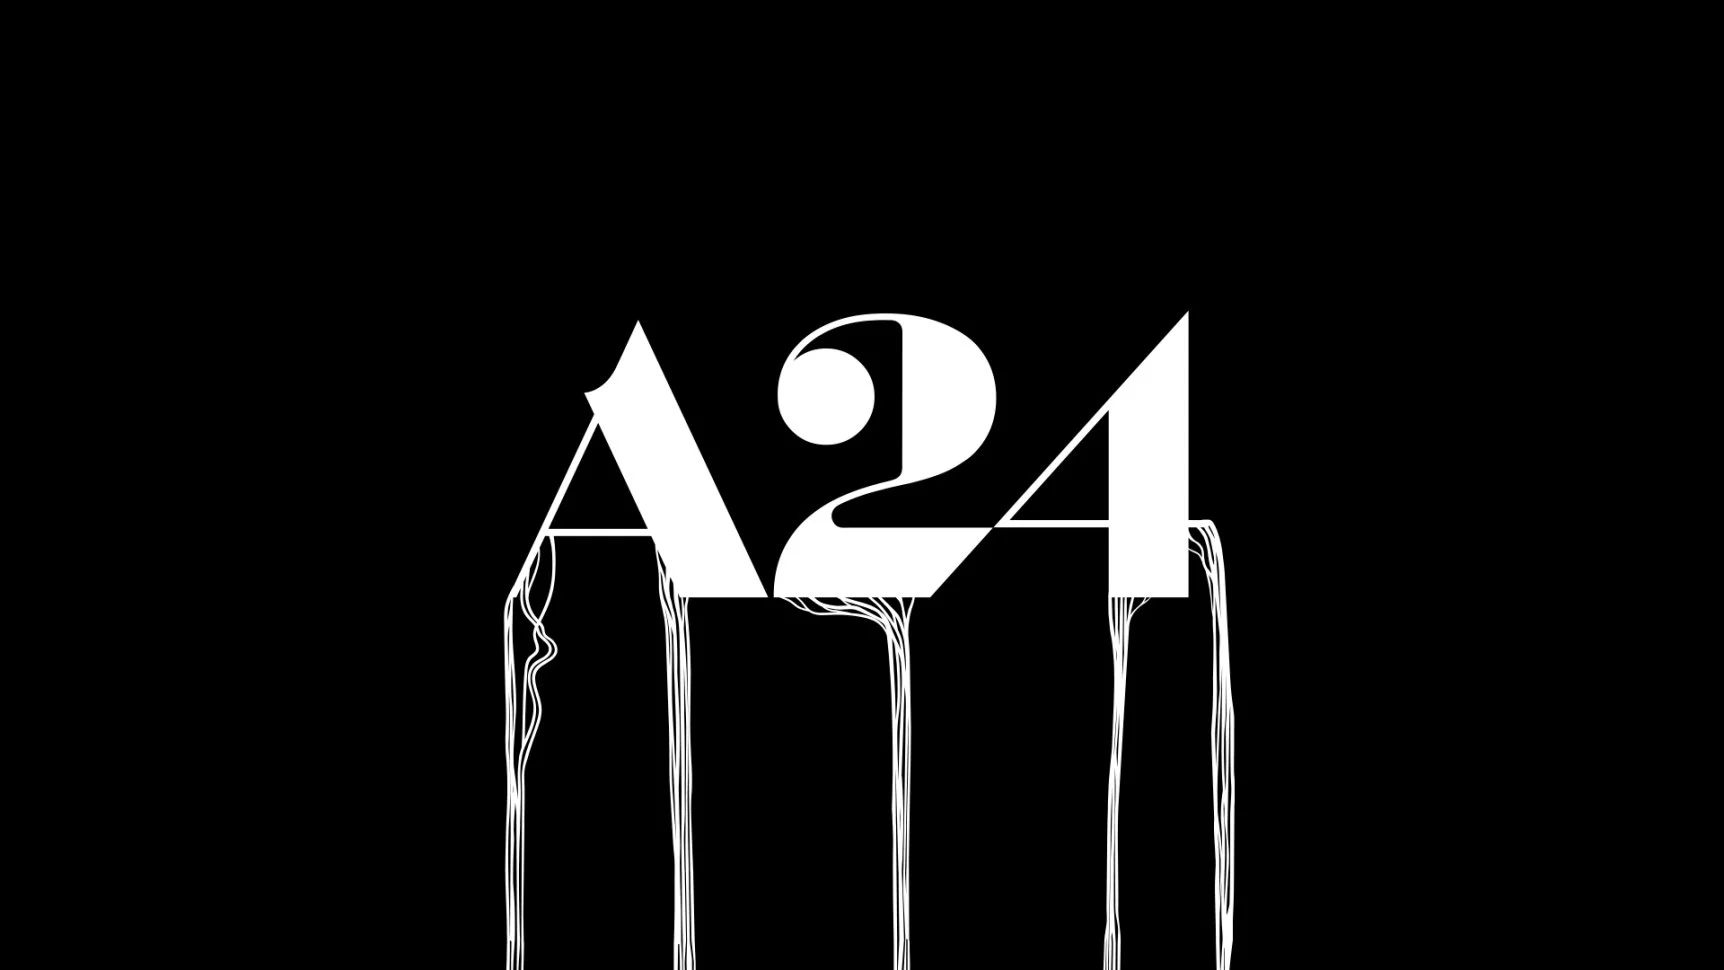 Powerful collaboration. Studio A24 will develop a film based on Death Stranding